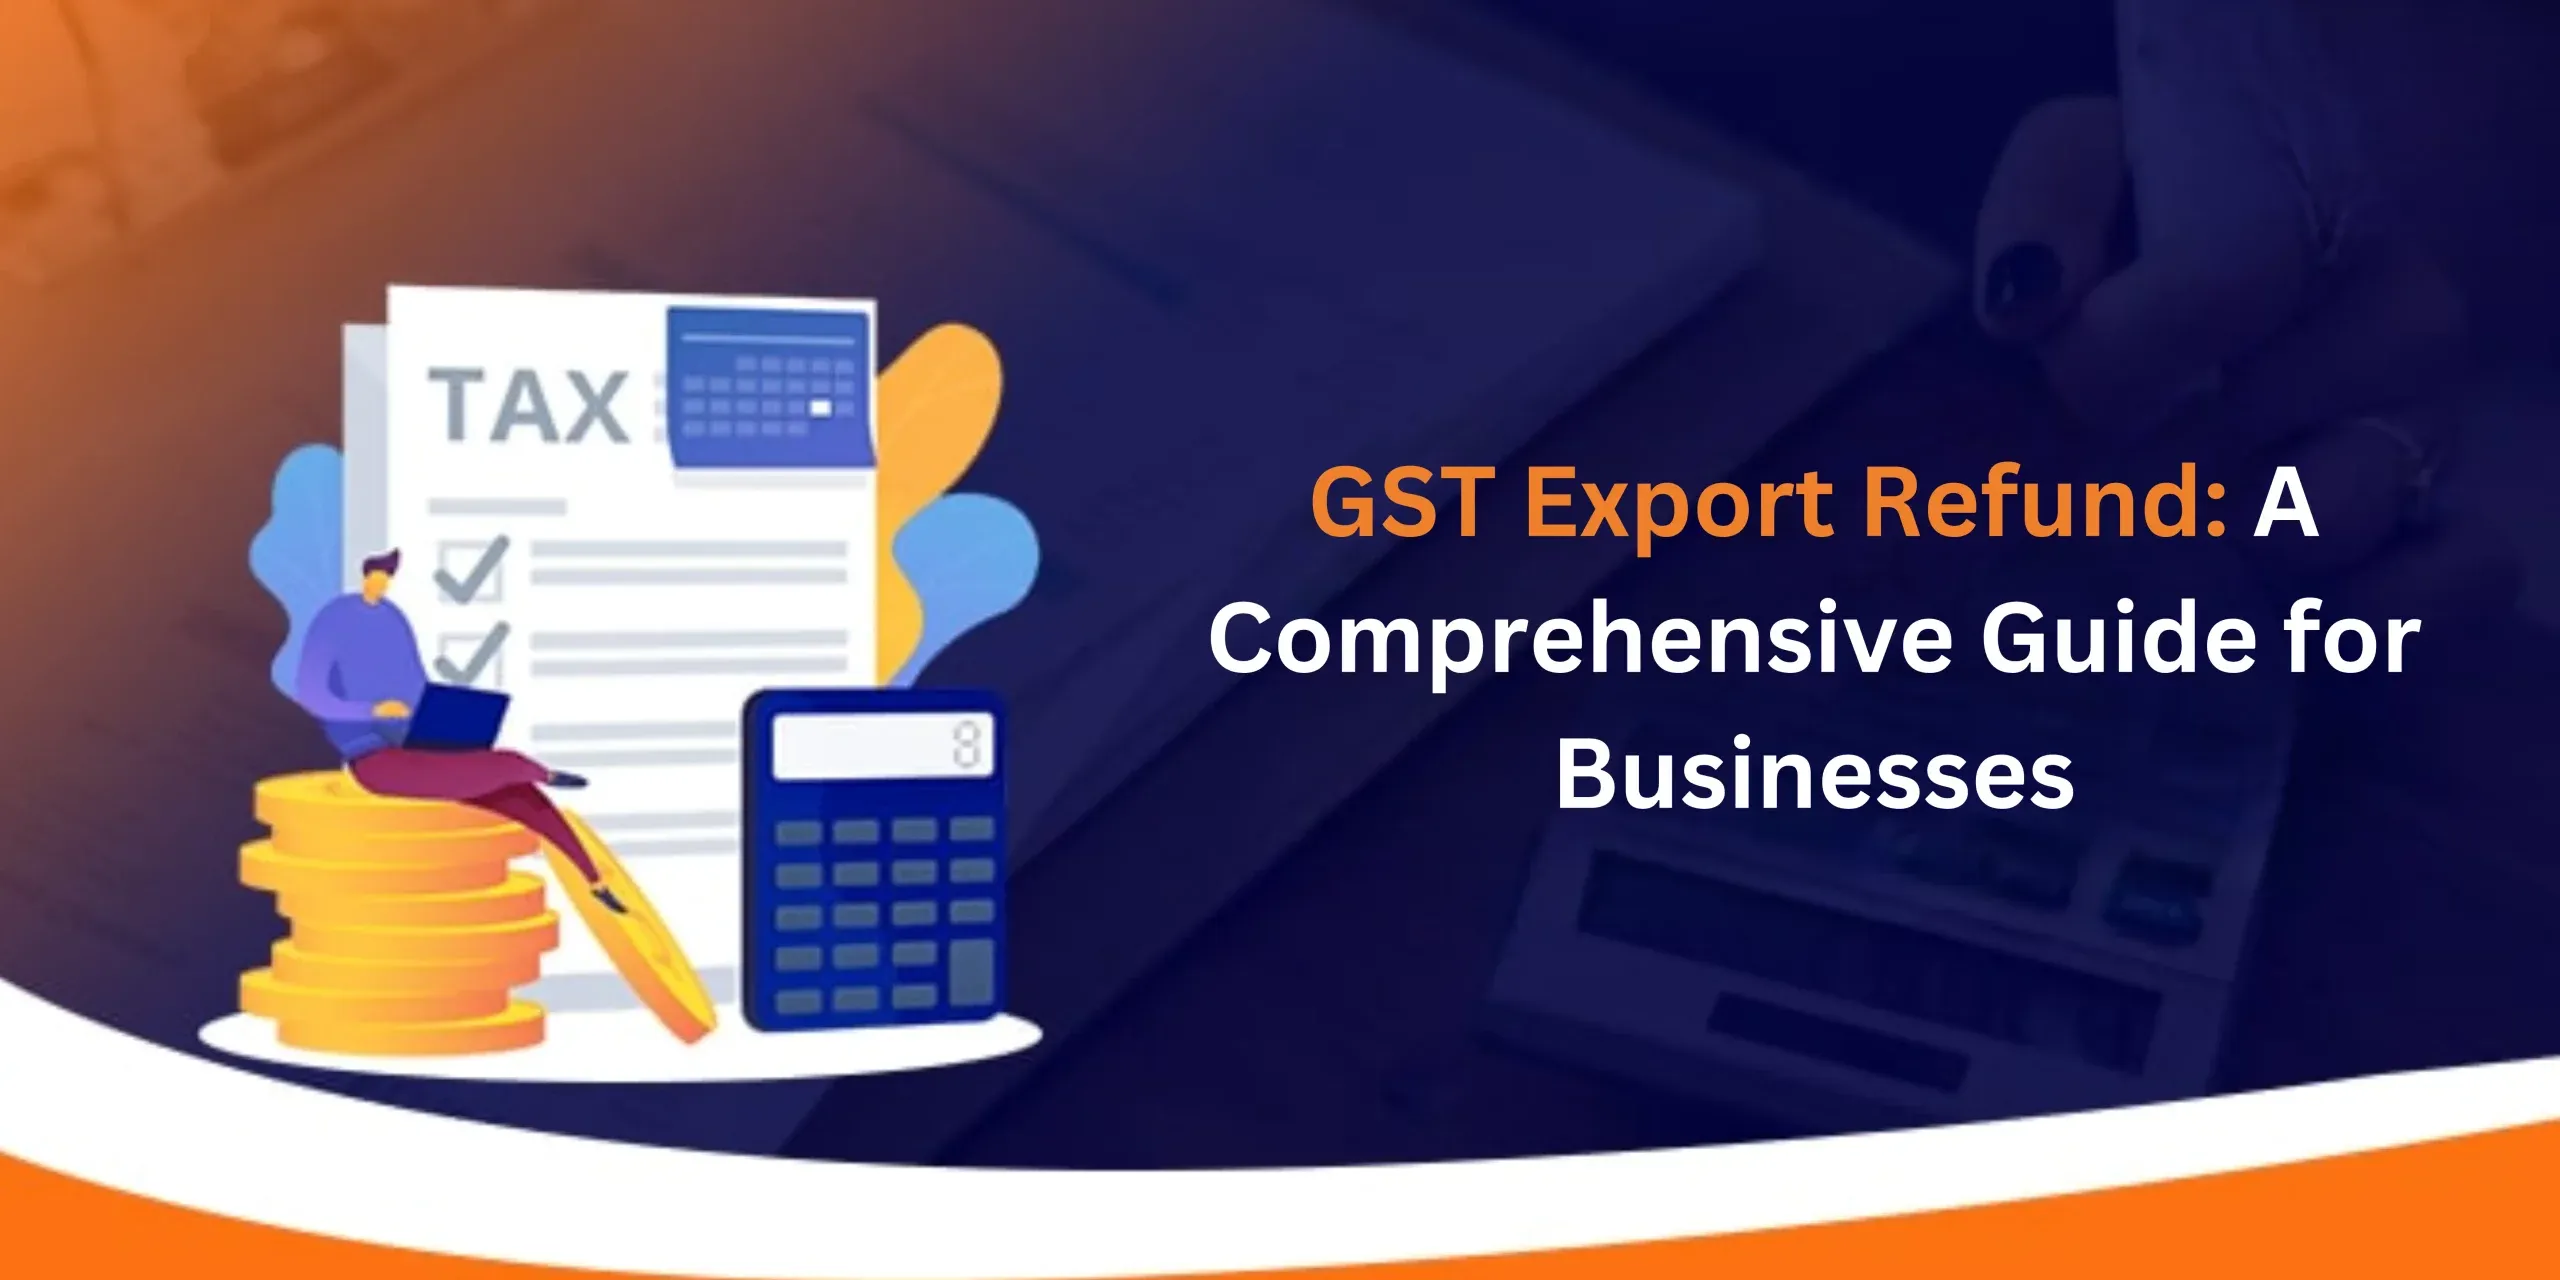 GST Export Refund: A Comprehensive Guide for Businesses